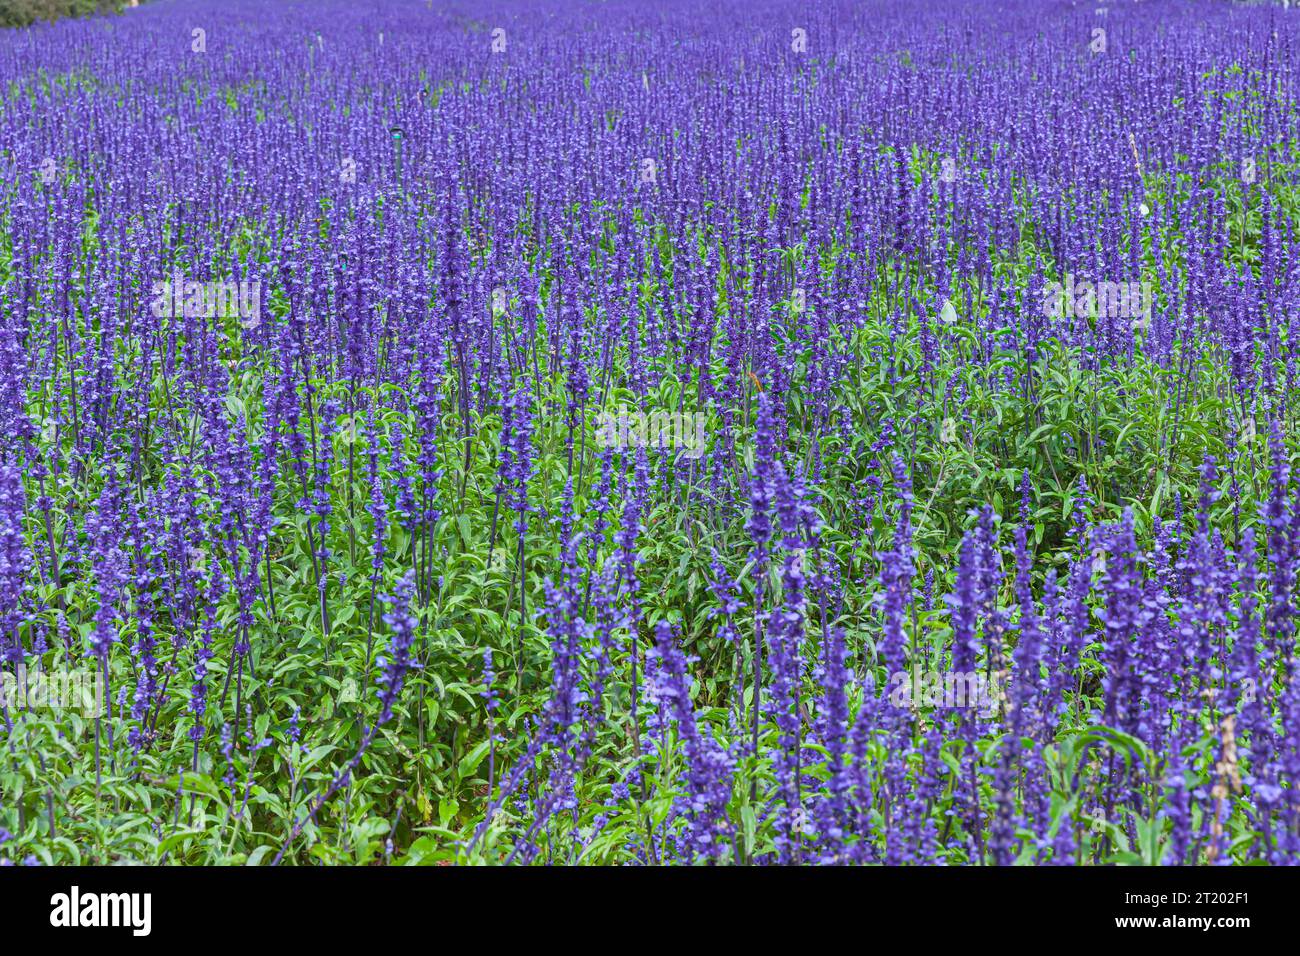 The field of Salvia Farinacea also known as Mealycup blue sage, blooming in sunny day Stock Photo